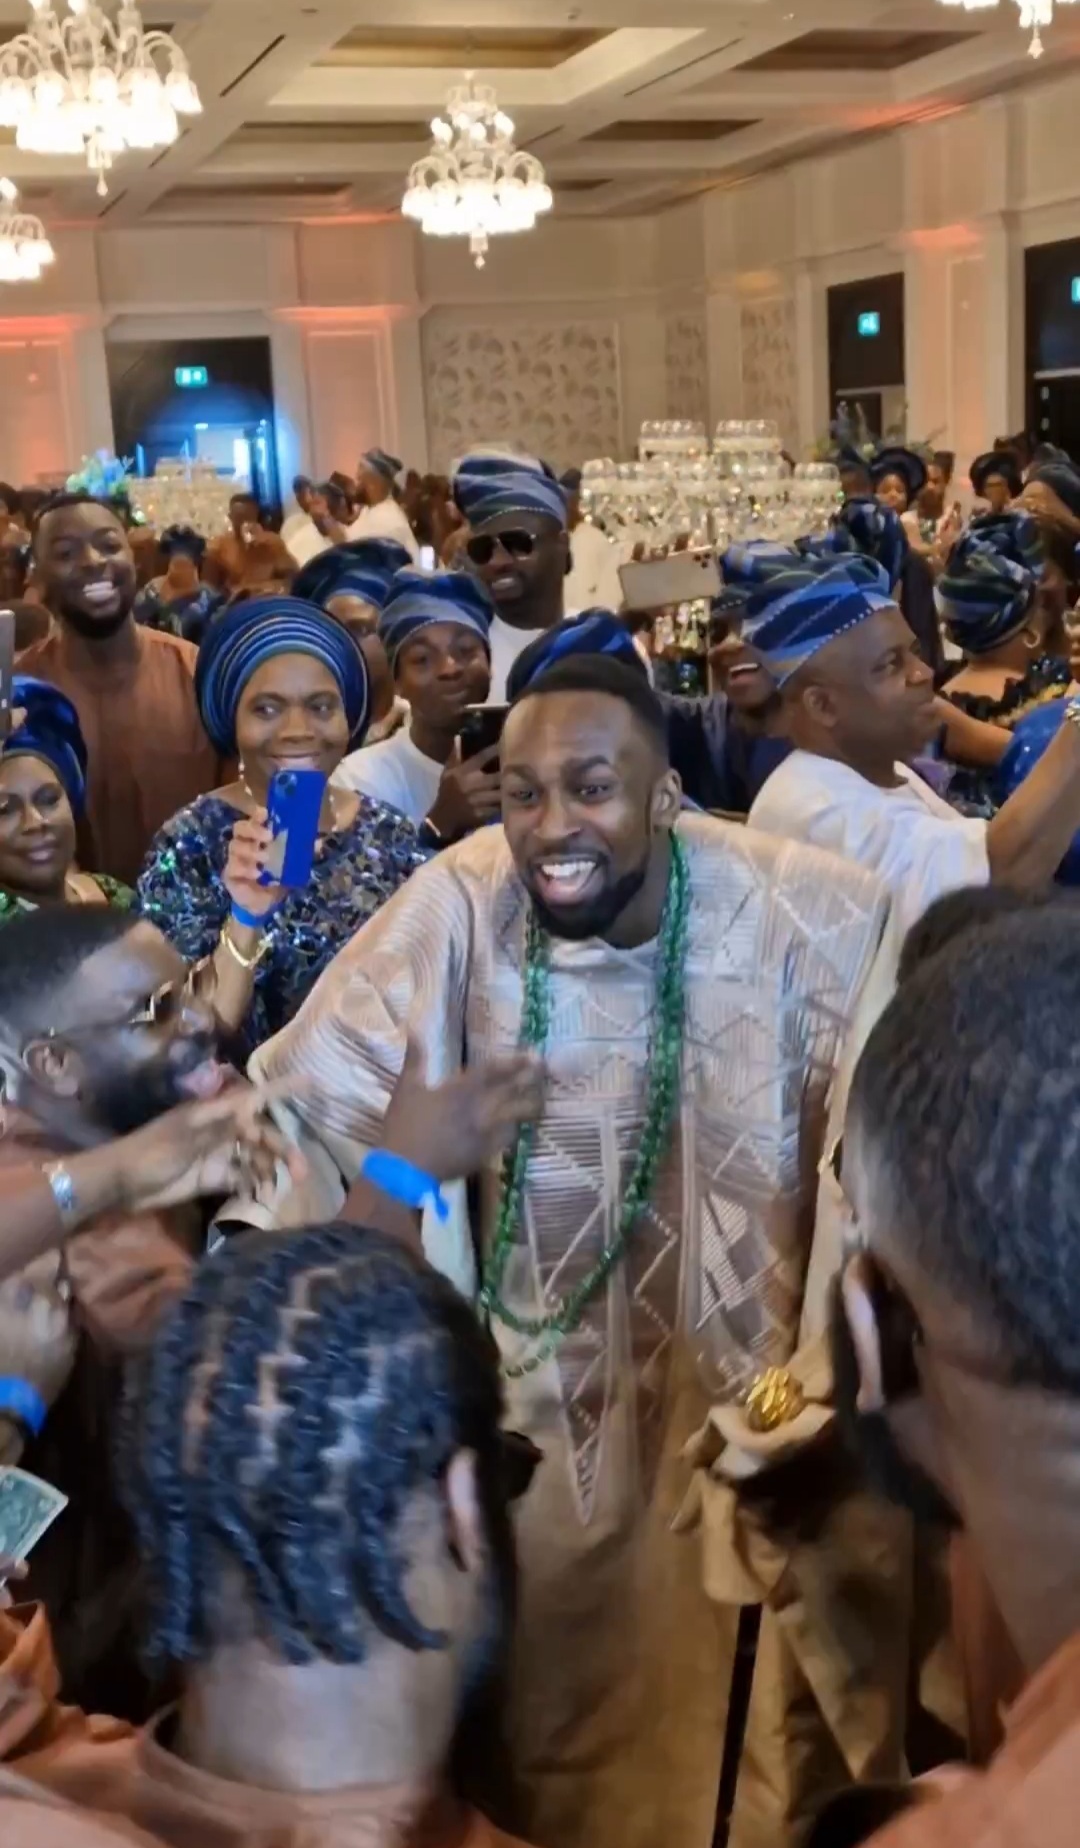 The Hype, The Power, The Vibes! This Groom and His Squad Introduced It All